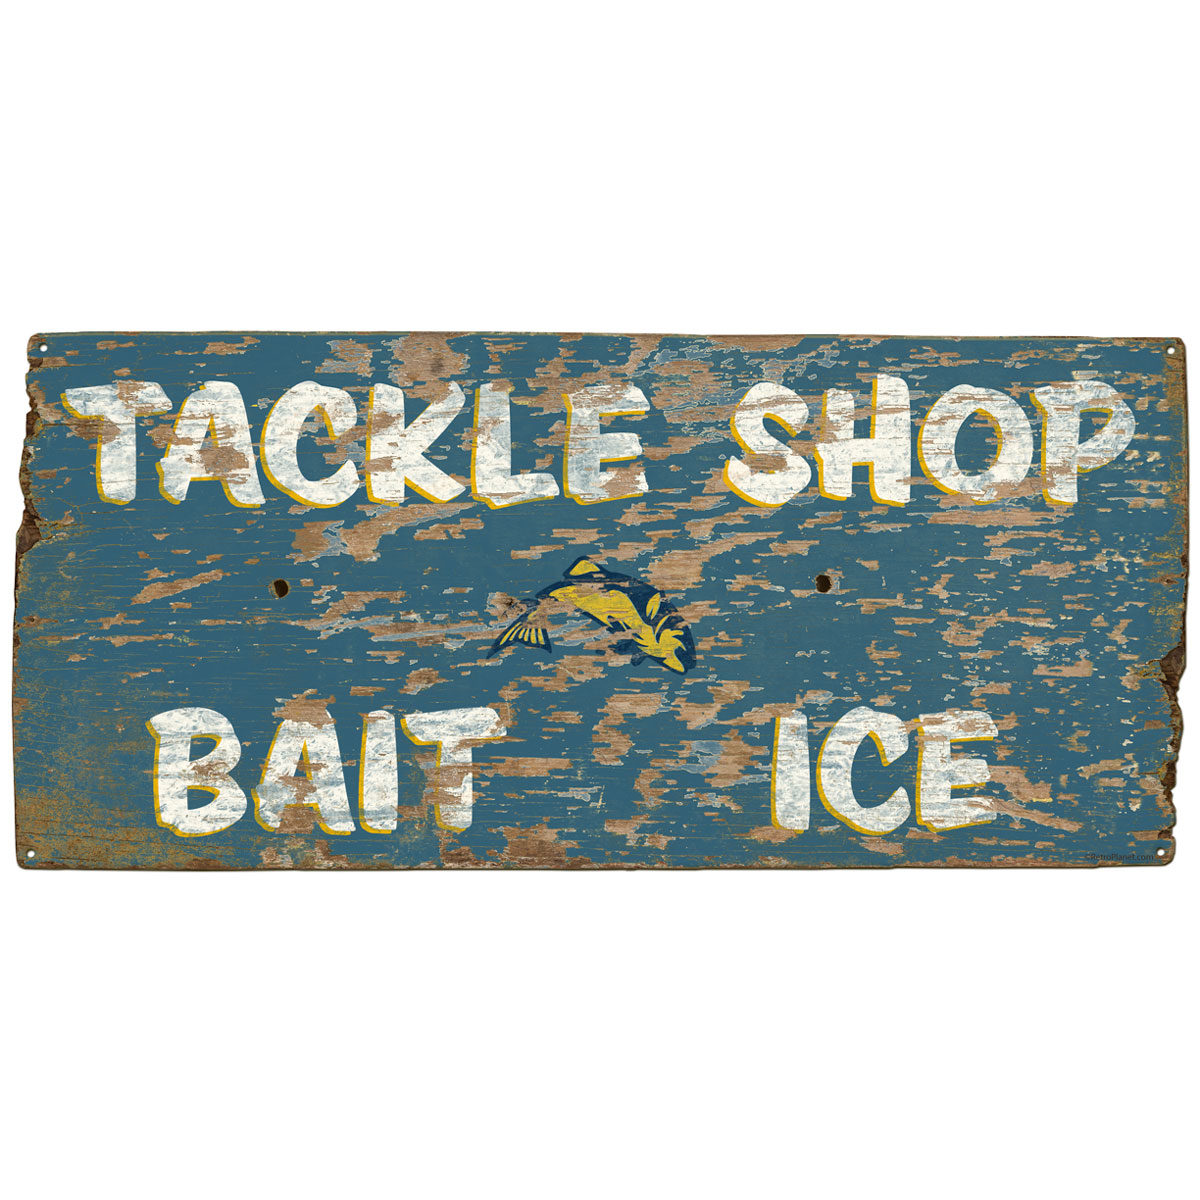 Carl's Bait Shop Sign Needs Our Help! - Everything South Dakota